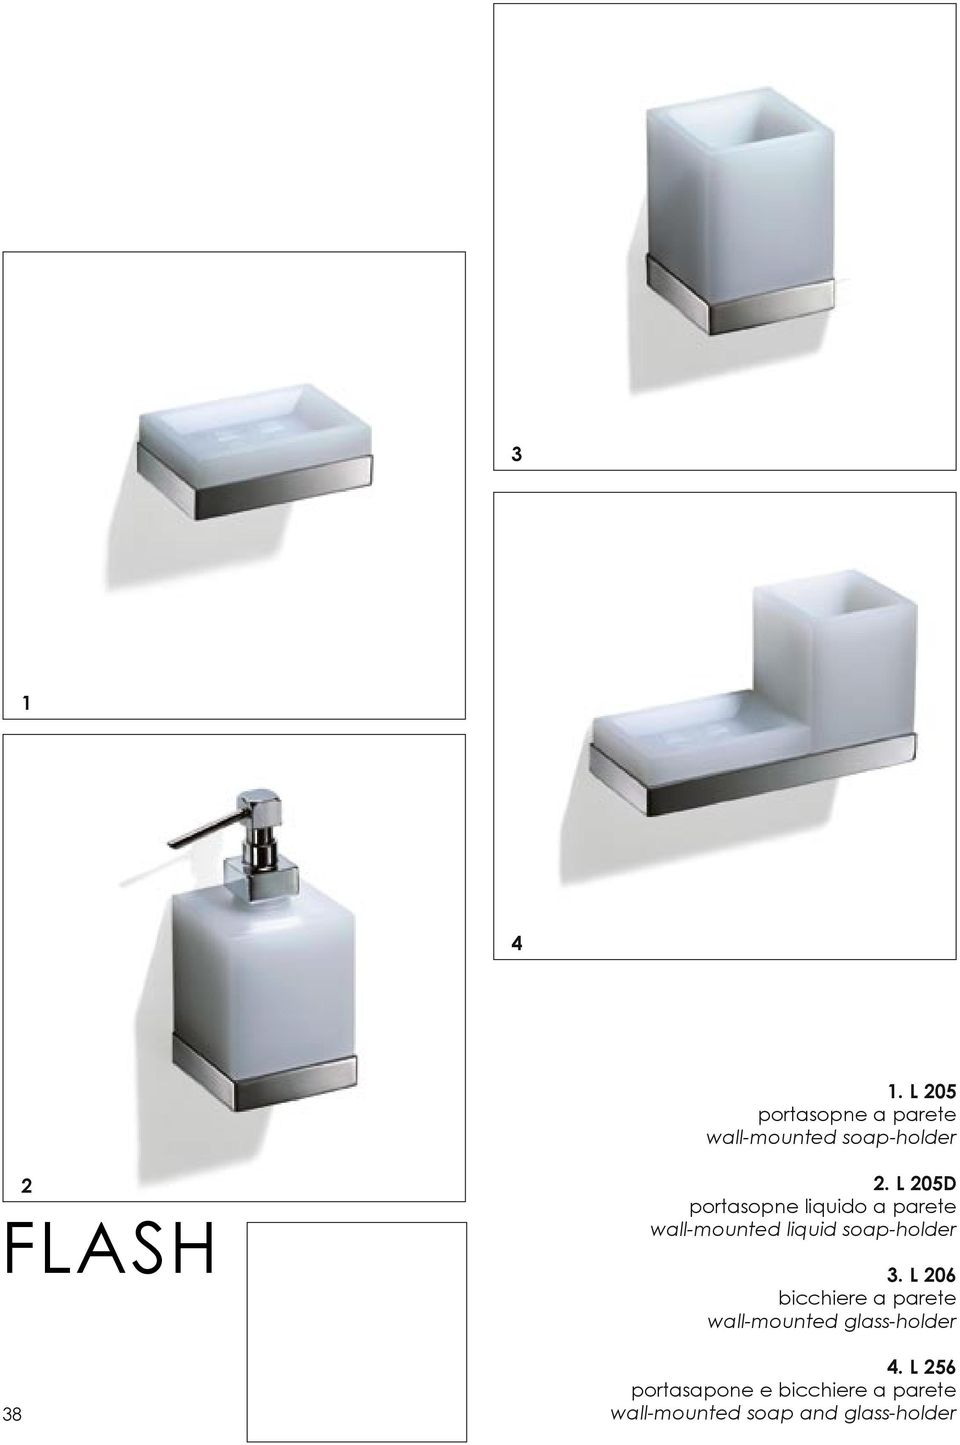 3. L 206 bicchiere a parete wall-mounted glass-holder 4.